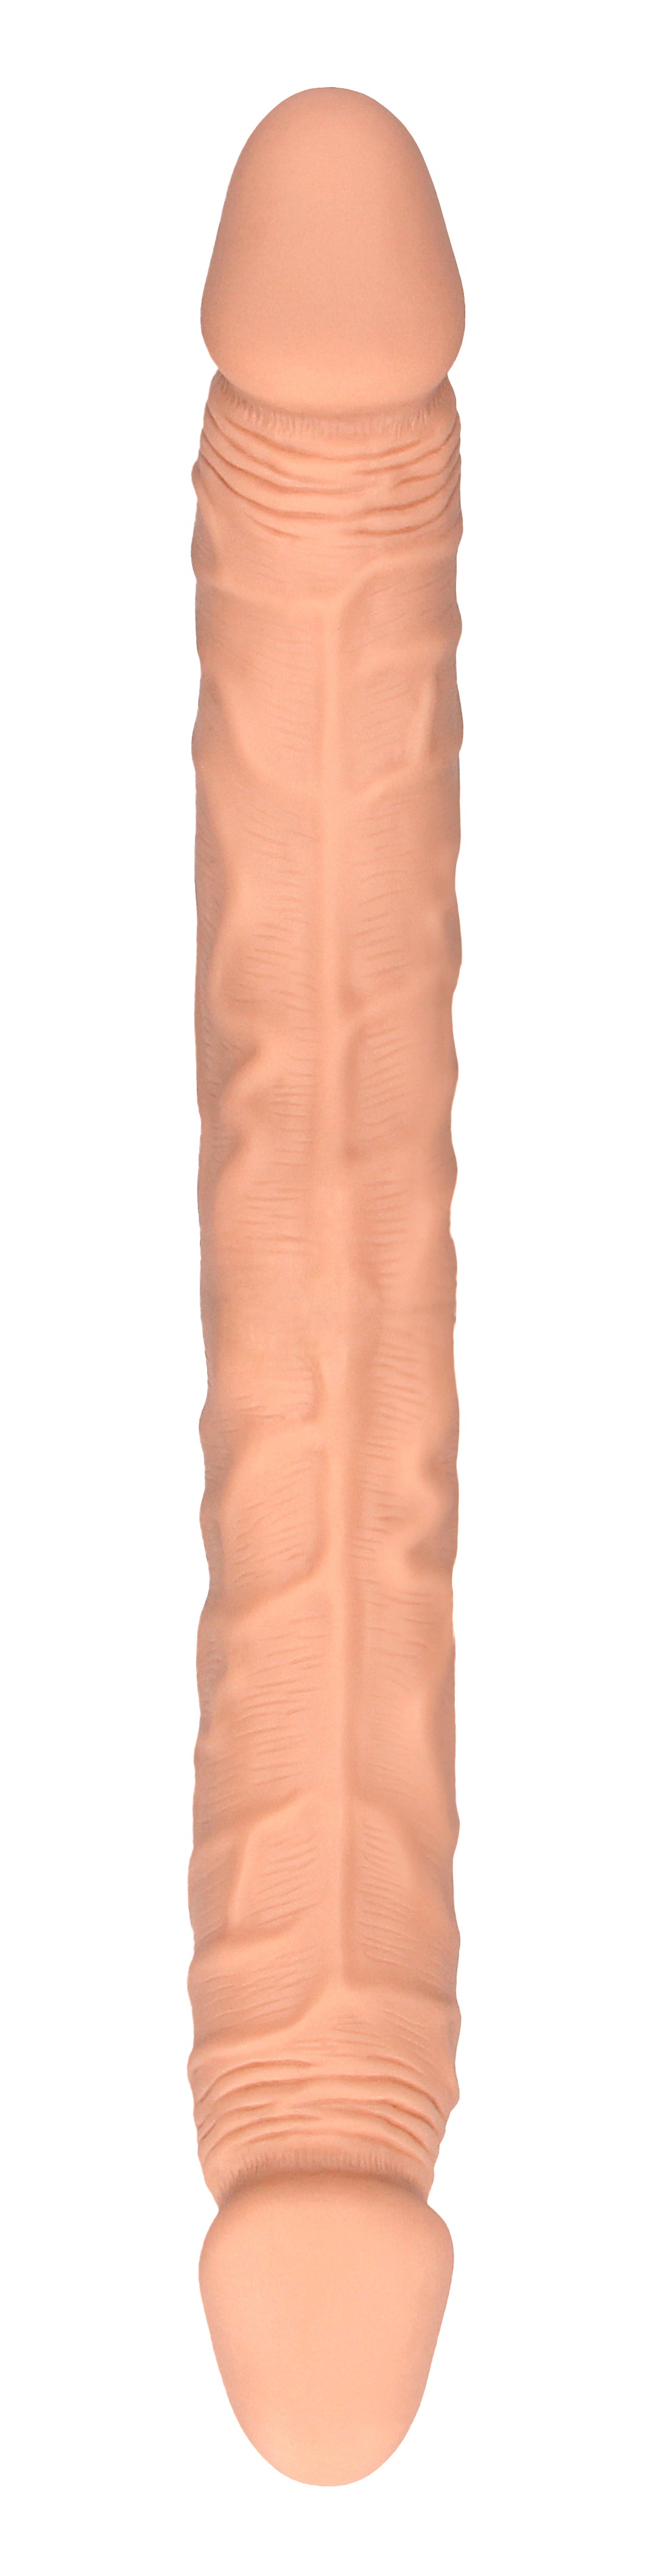 18 Inch Double Dong - Flesh